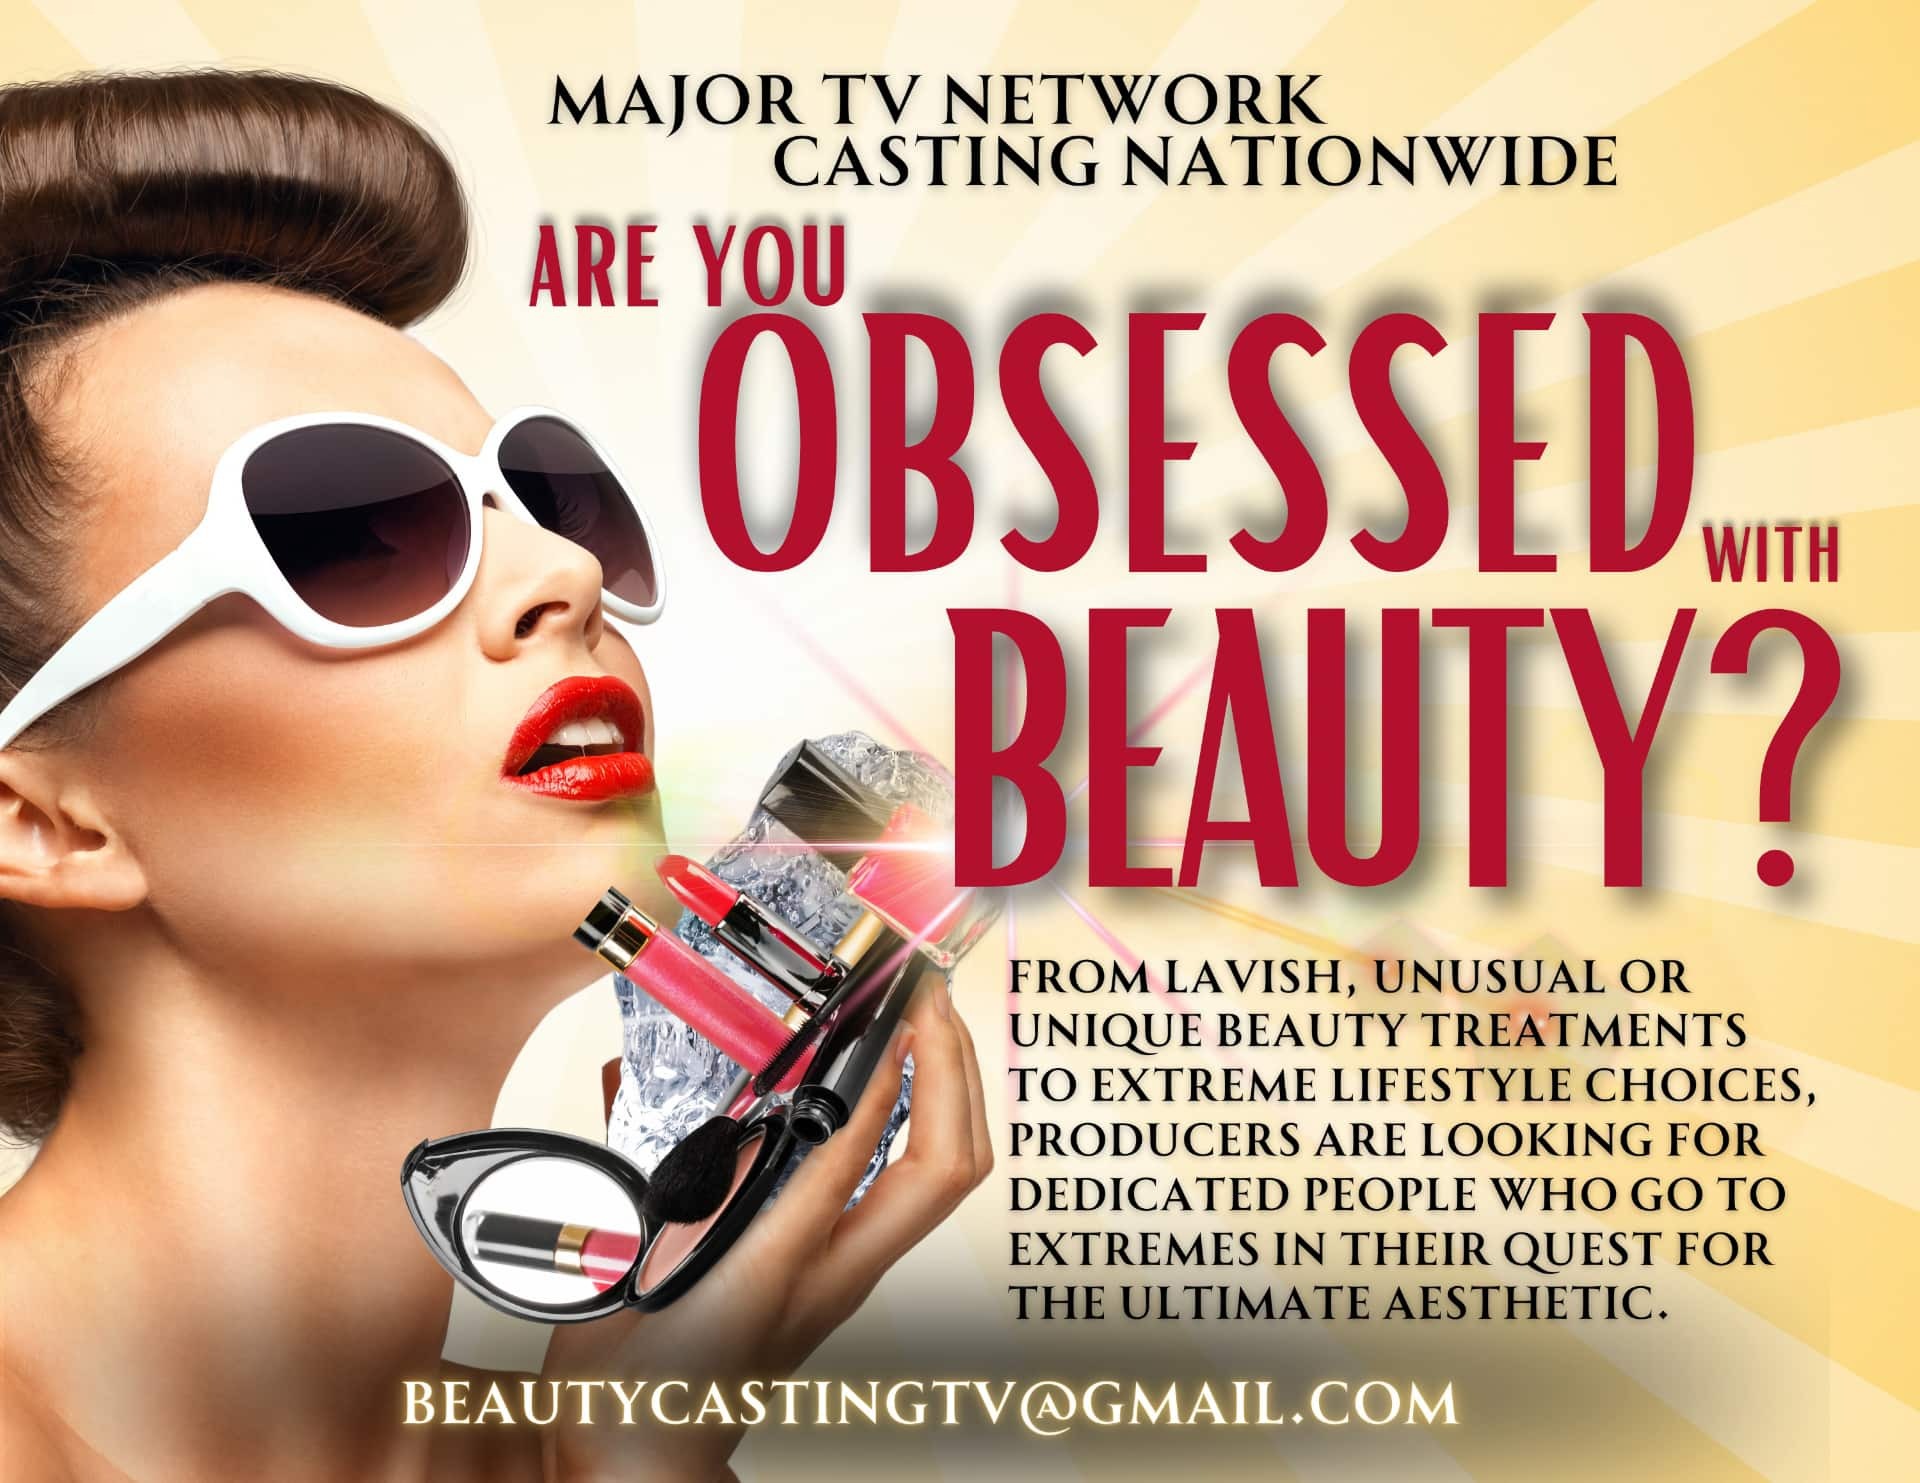 Are You Obsessed with Beauty?